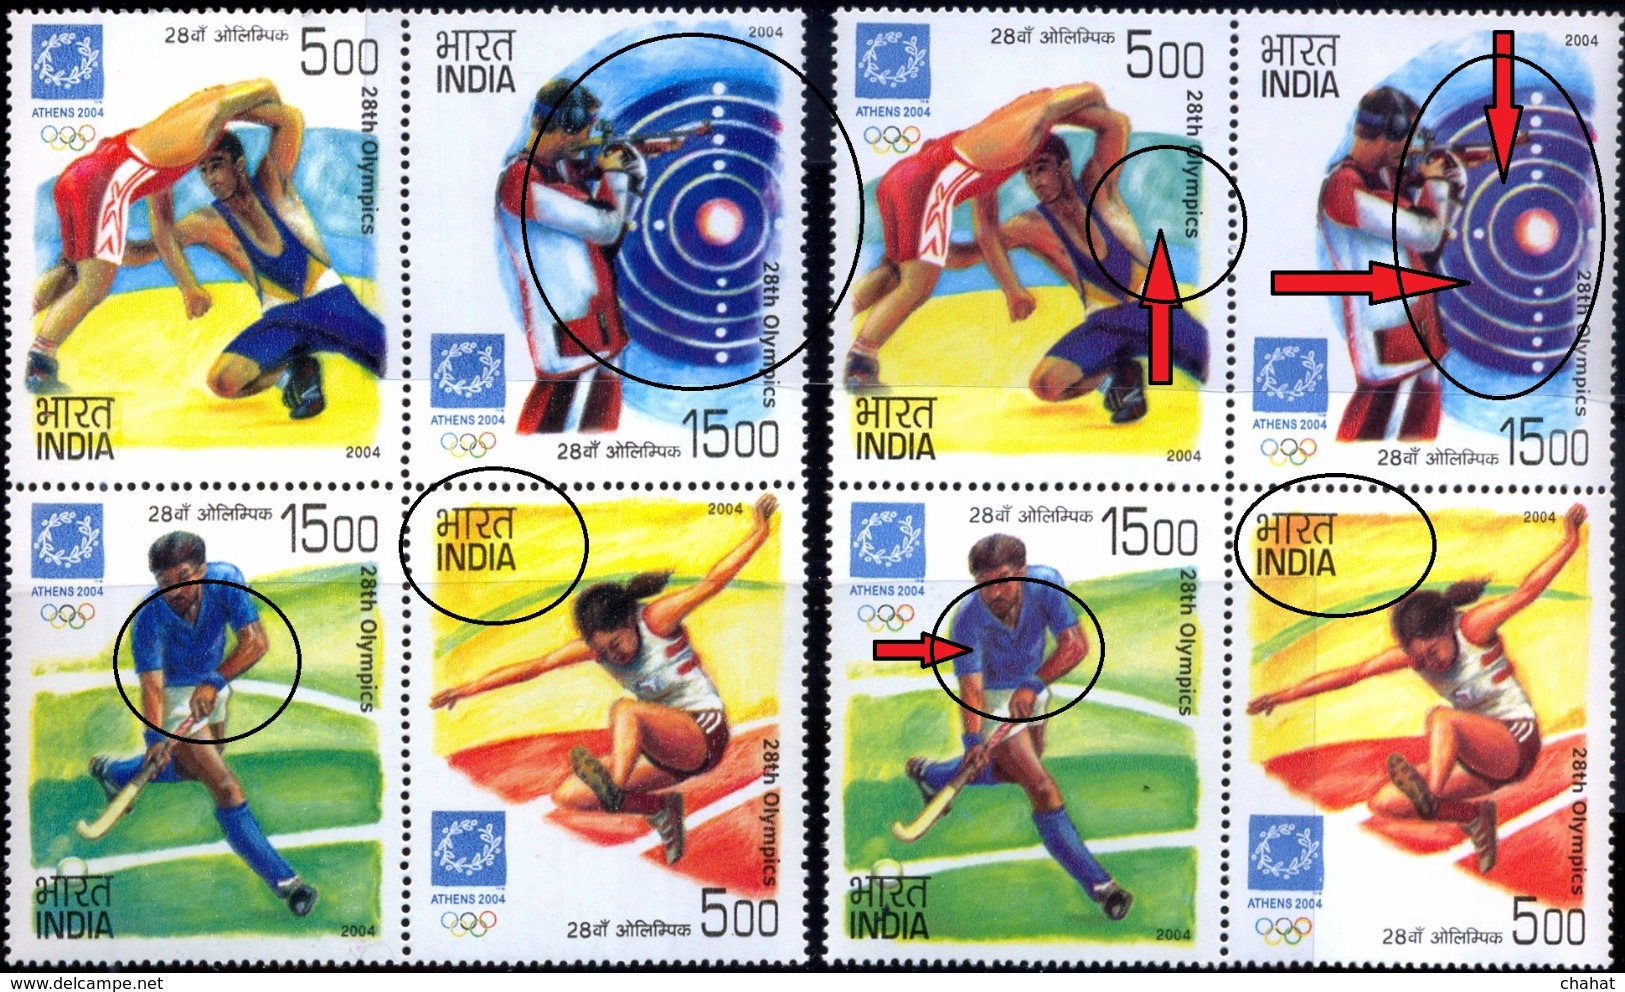 OLYMPICS-ATHENS 2004-SHOOTING-WRESTLING-FIELD HOCKEY-ATHLETICS-ERROR-COLOR VARIETY-2 X BLOCKS-INDIA-MNH-H1-255 - Sommer 2004: Athen